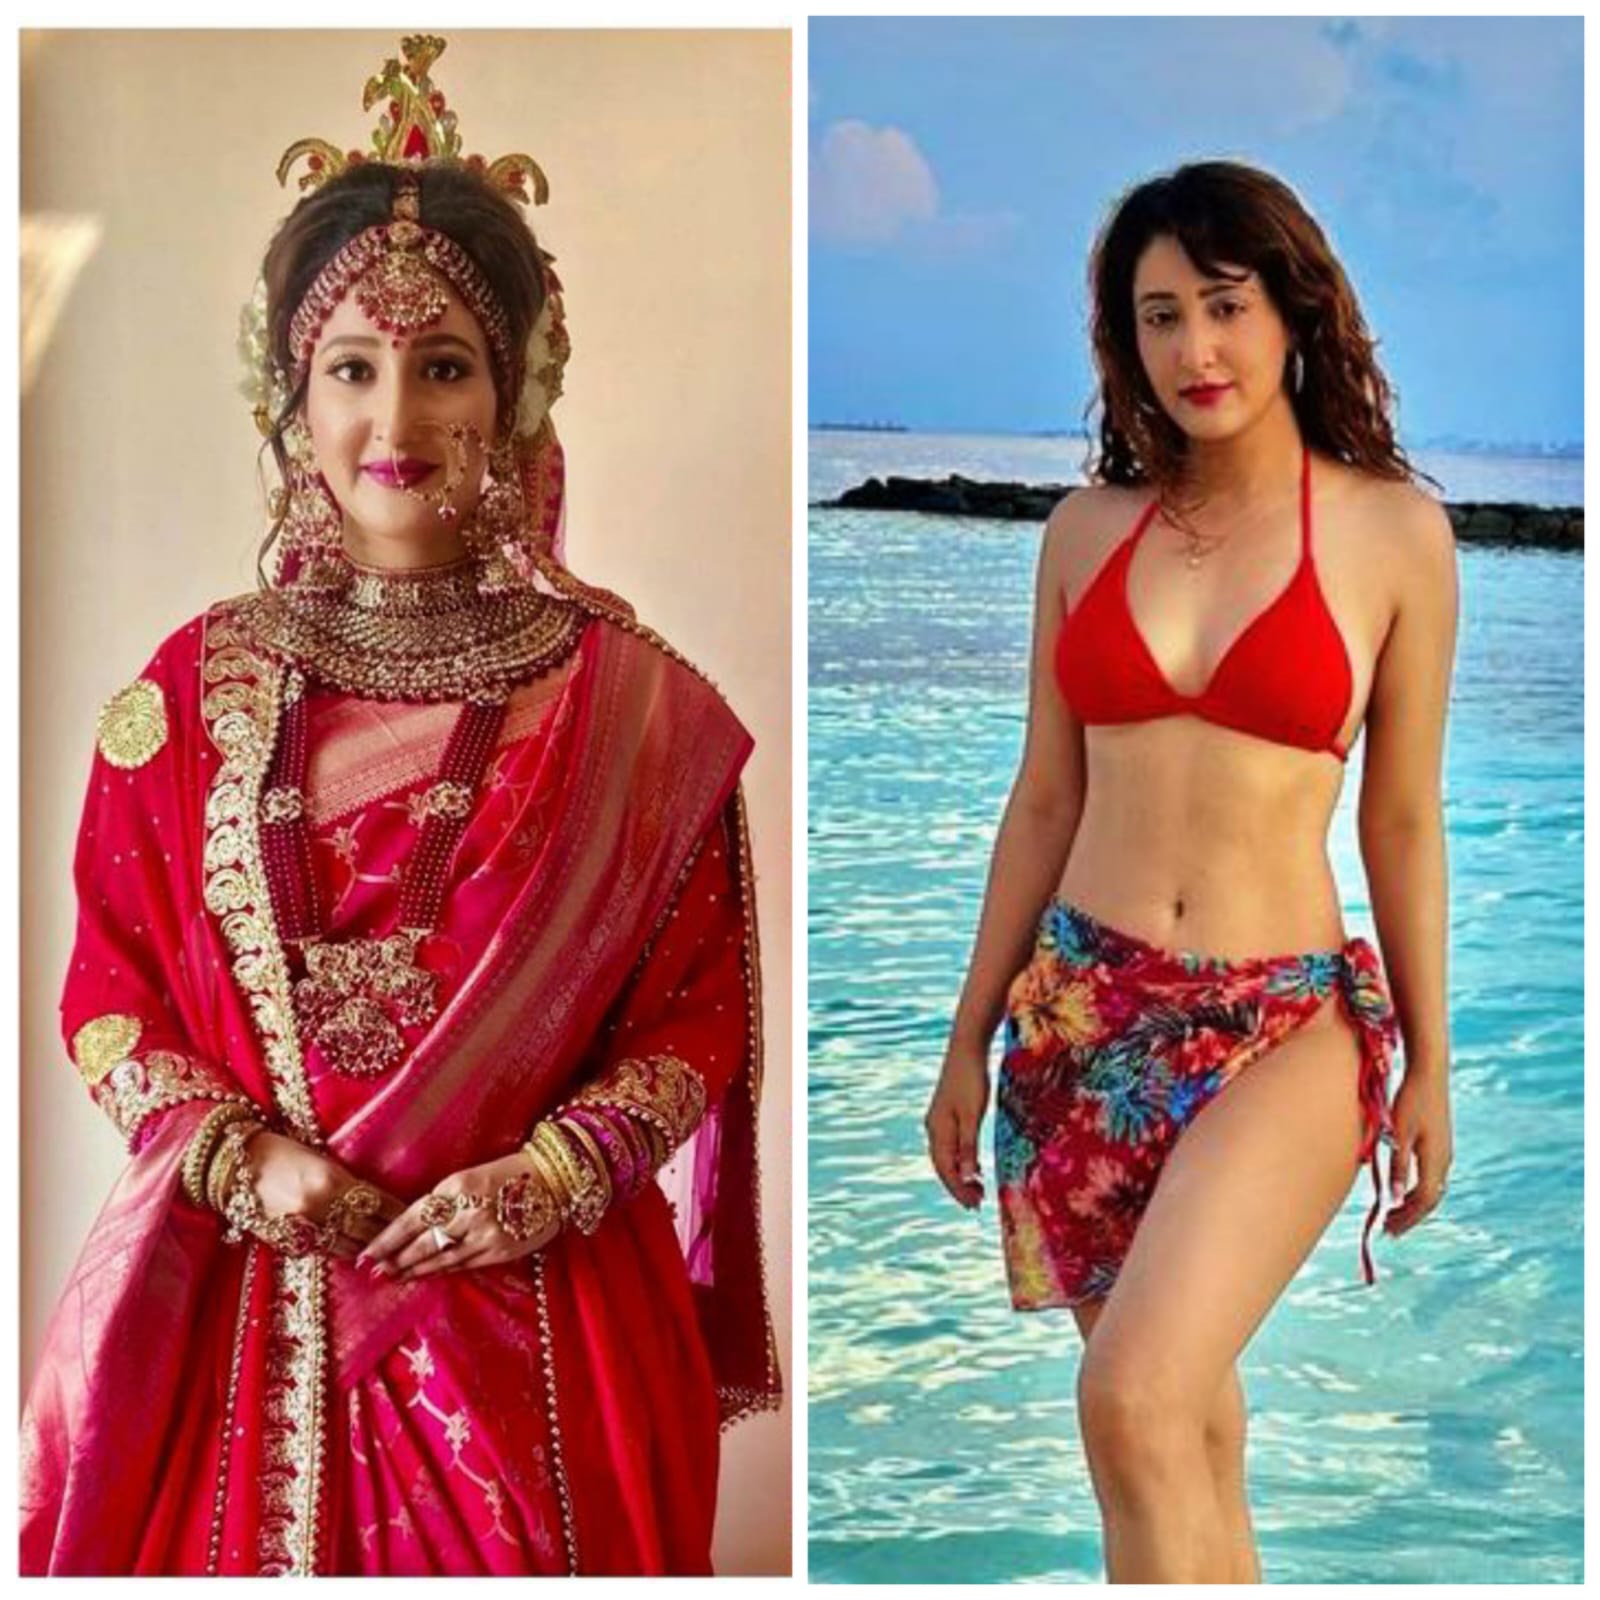 Shivya Pathania, opens up fighting stereotypes since childhood for clothing choices after getting unnecessary trolled for her recent bikini pictures, says, I have been fighting stereotypes to tell that the choice of clothing can and will never judge a woman’s character of what aura, substance, and v